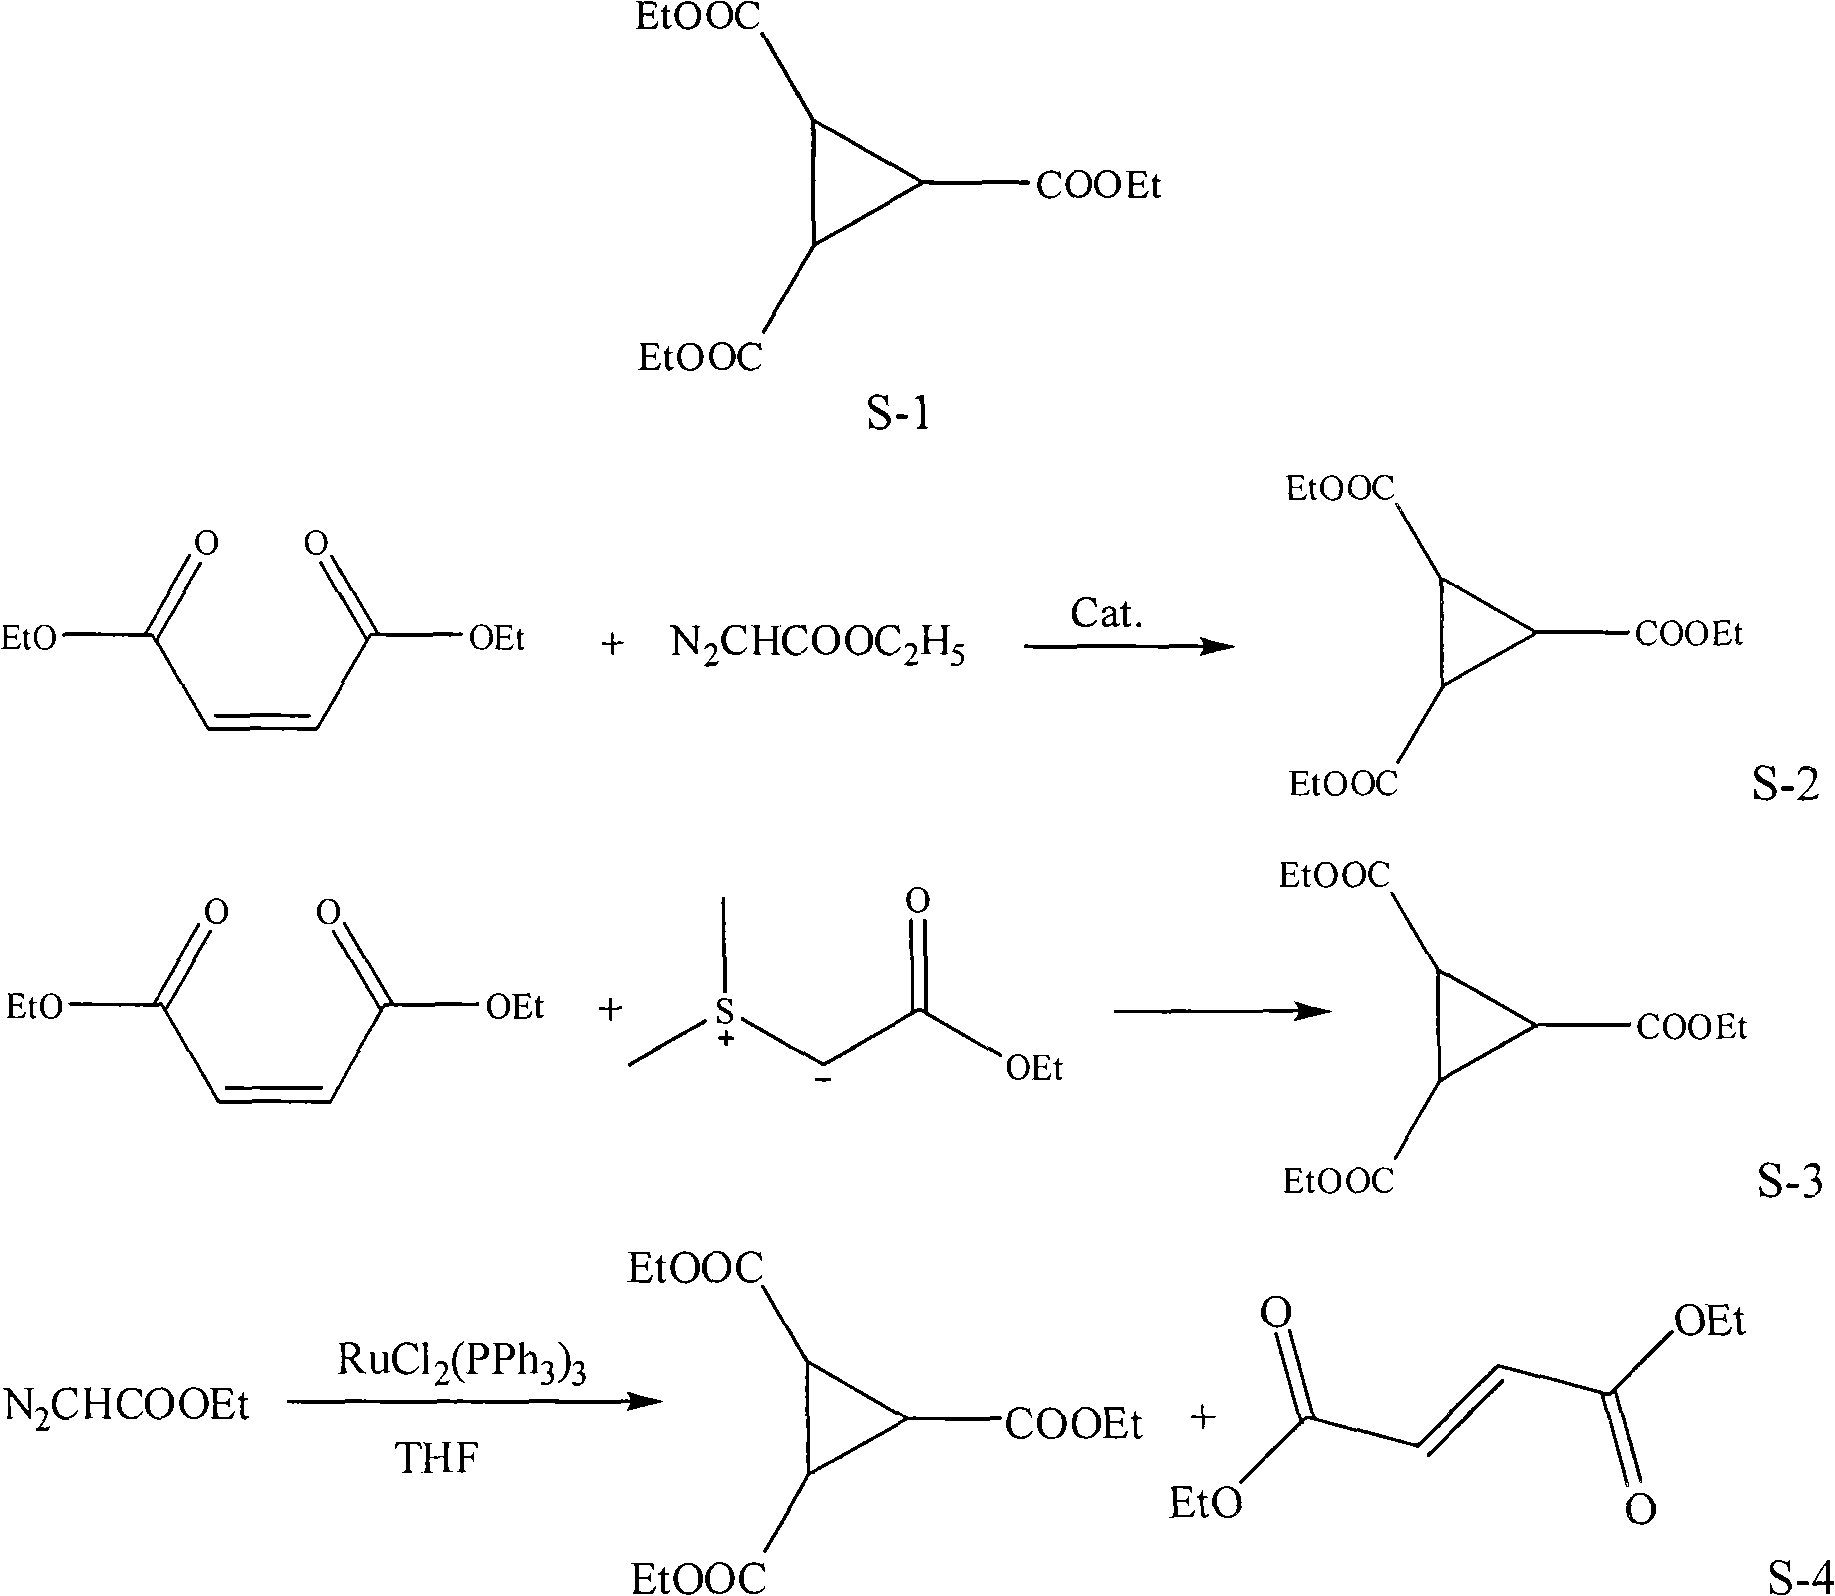 Preparation method of 1,2,3-cyclopropyl tricarboxylate